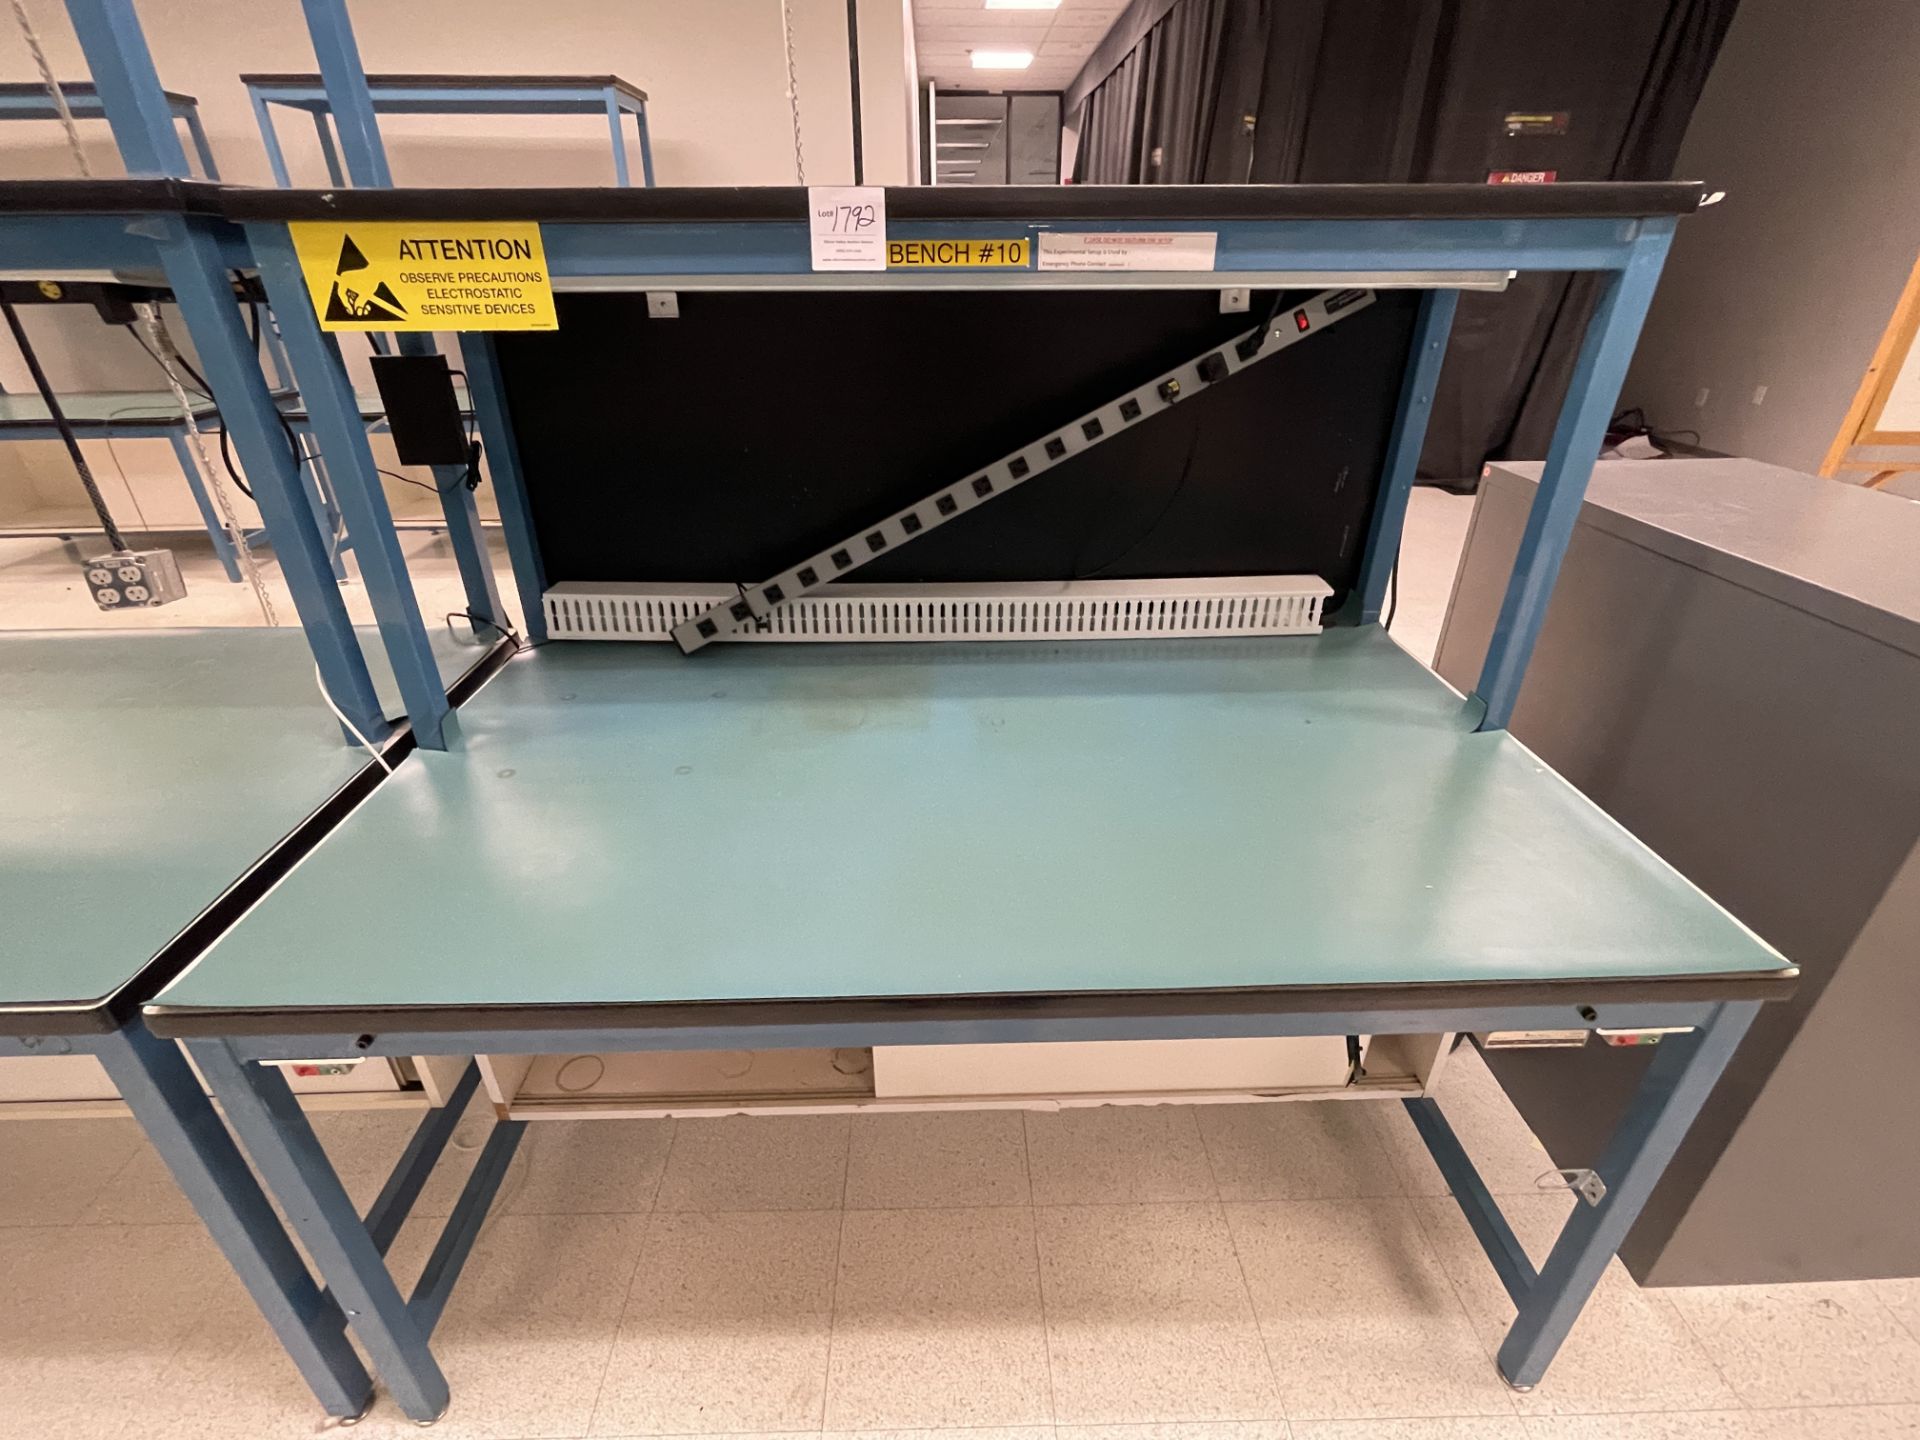 Blue Work Bench with one shelf and power strip